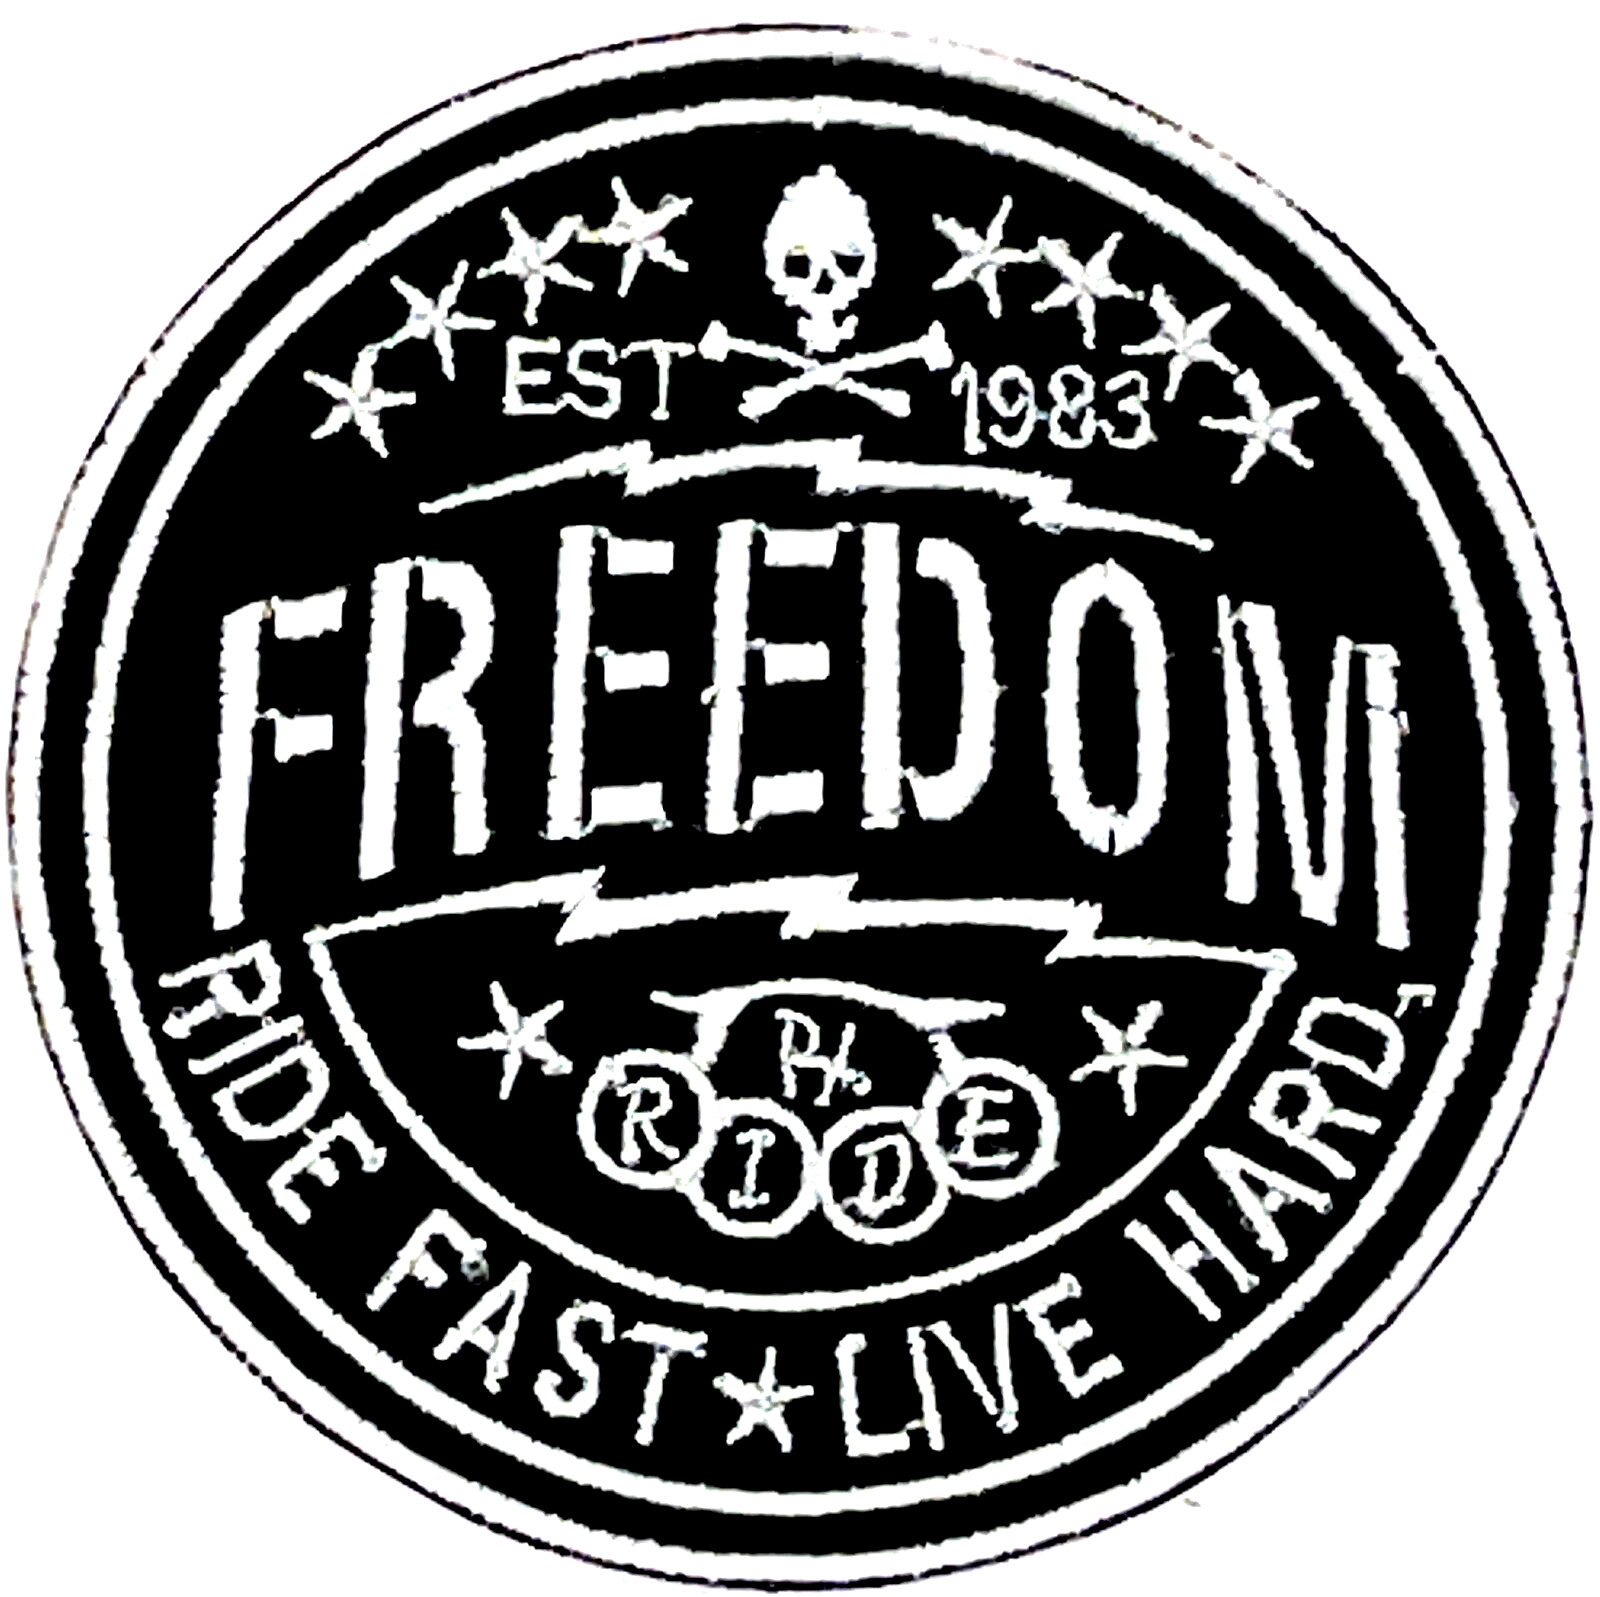 FREEDOM RIDE FAST LIVE HARD EMBROIDERED MOTORCYCLE VEST IRON ON PATCH T-8